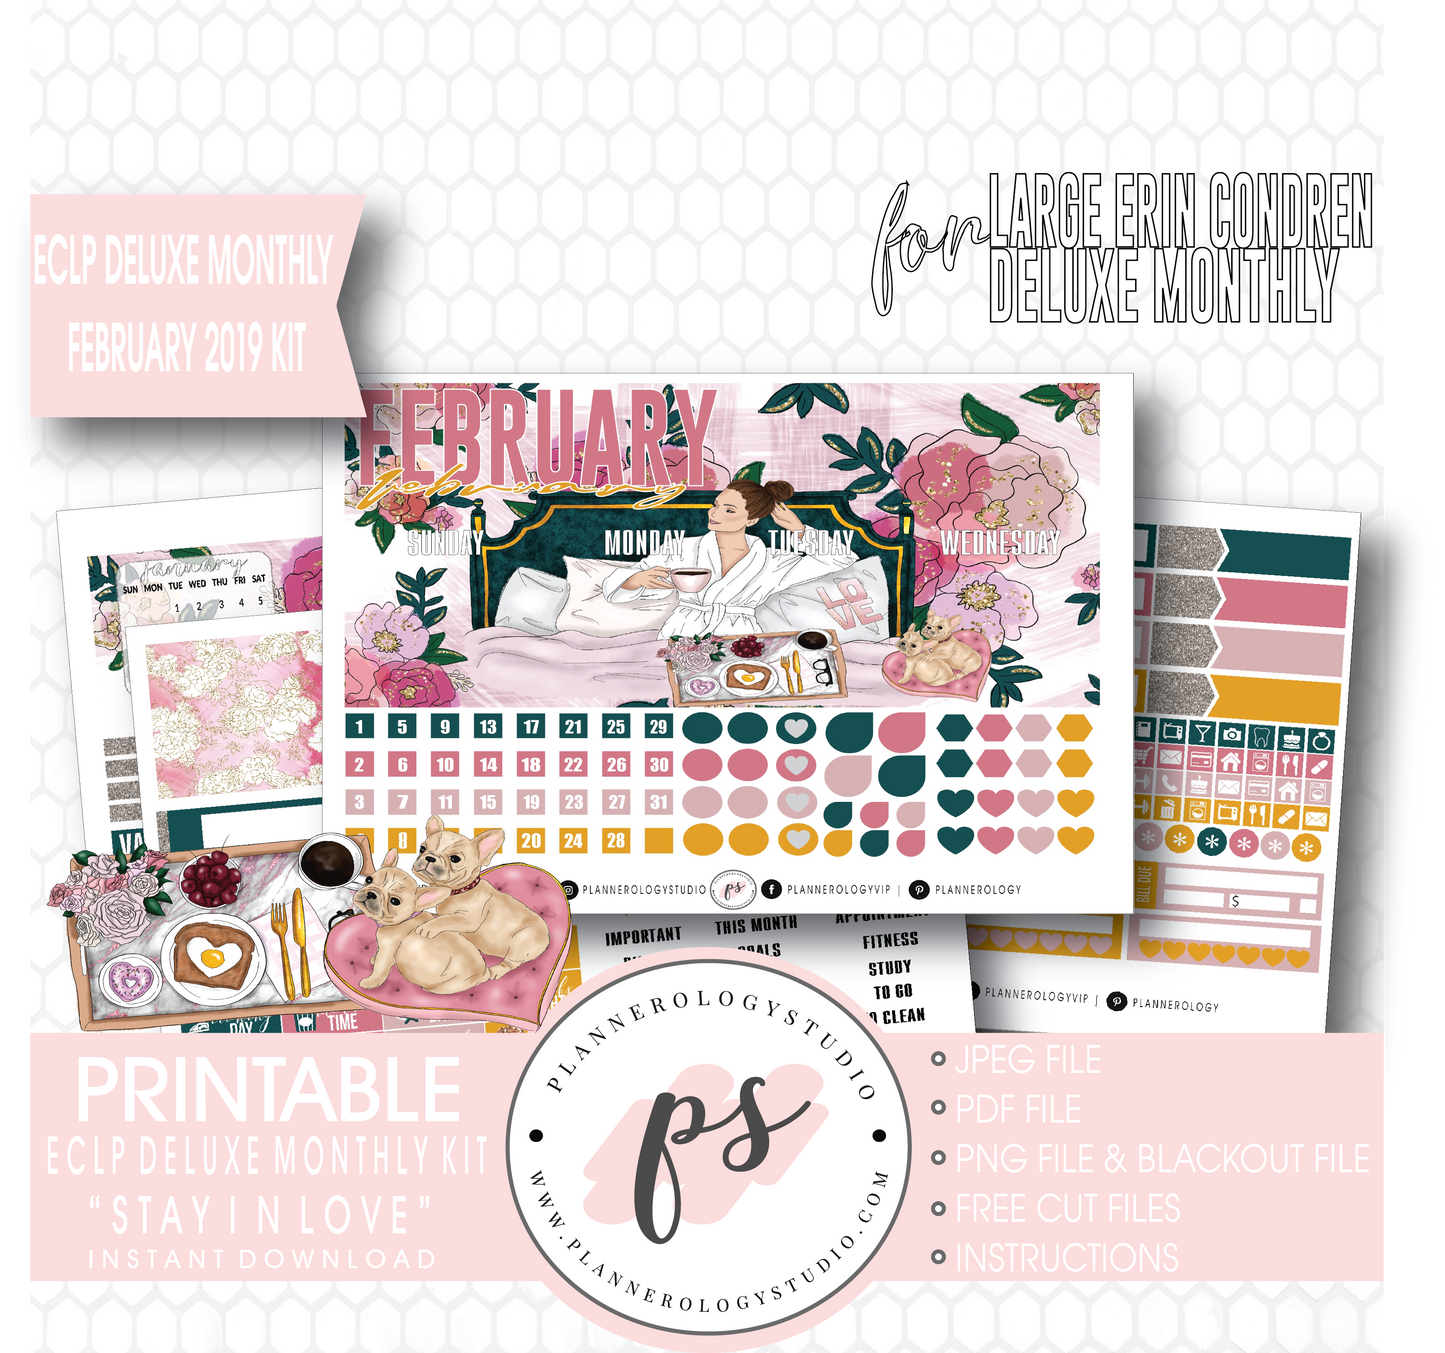 Stay In Love (Valentine's Day) February 2019 Monthly View Kit Digital Printable Planner Stickers (for use with Erin Condren Large Deluxe Monthly Planner) - Plannerologystudio